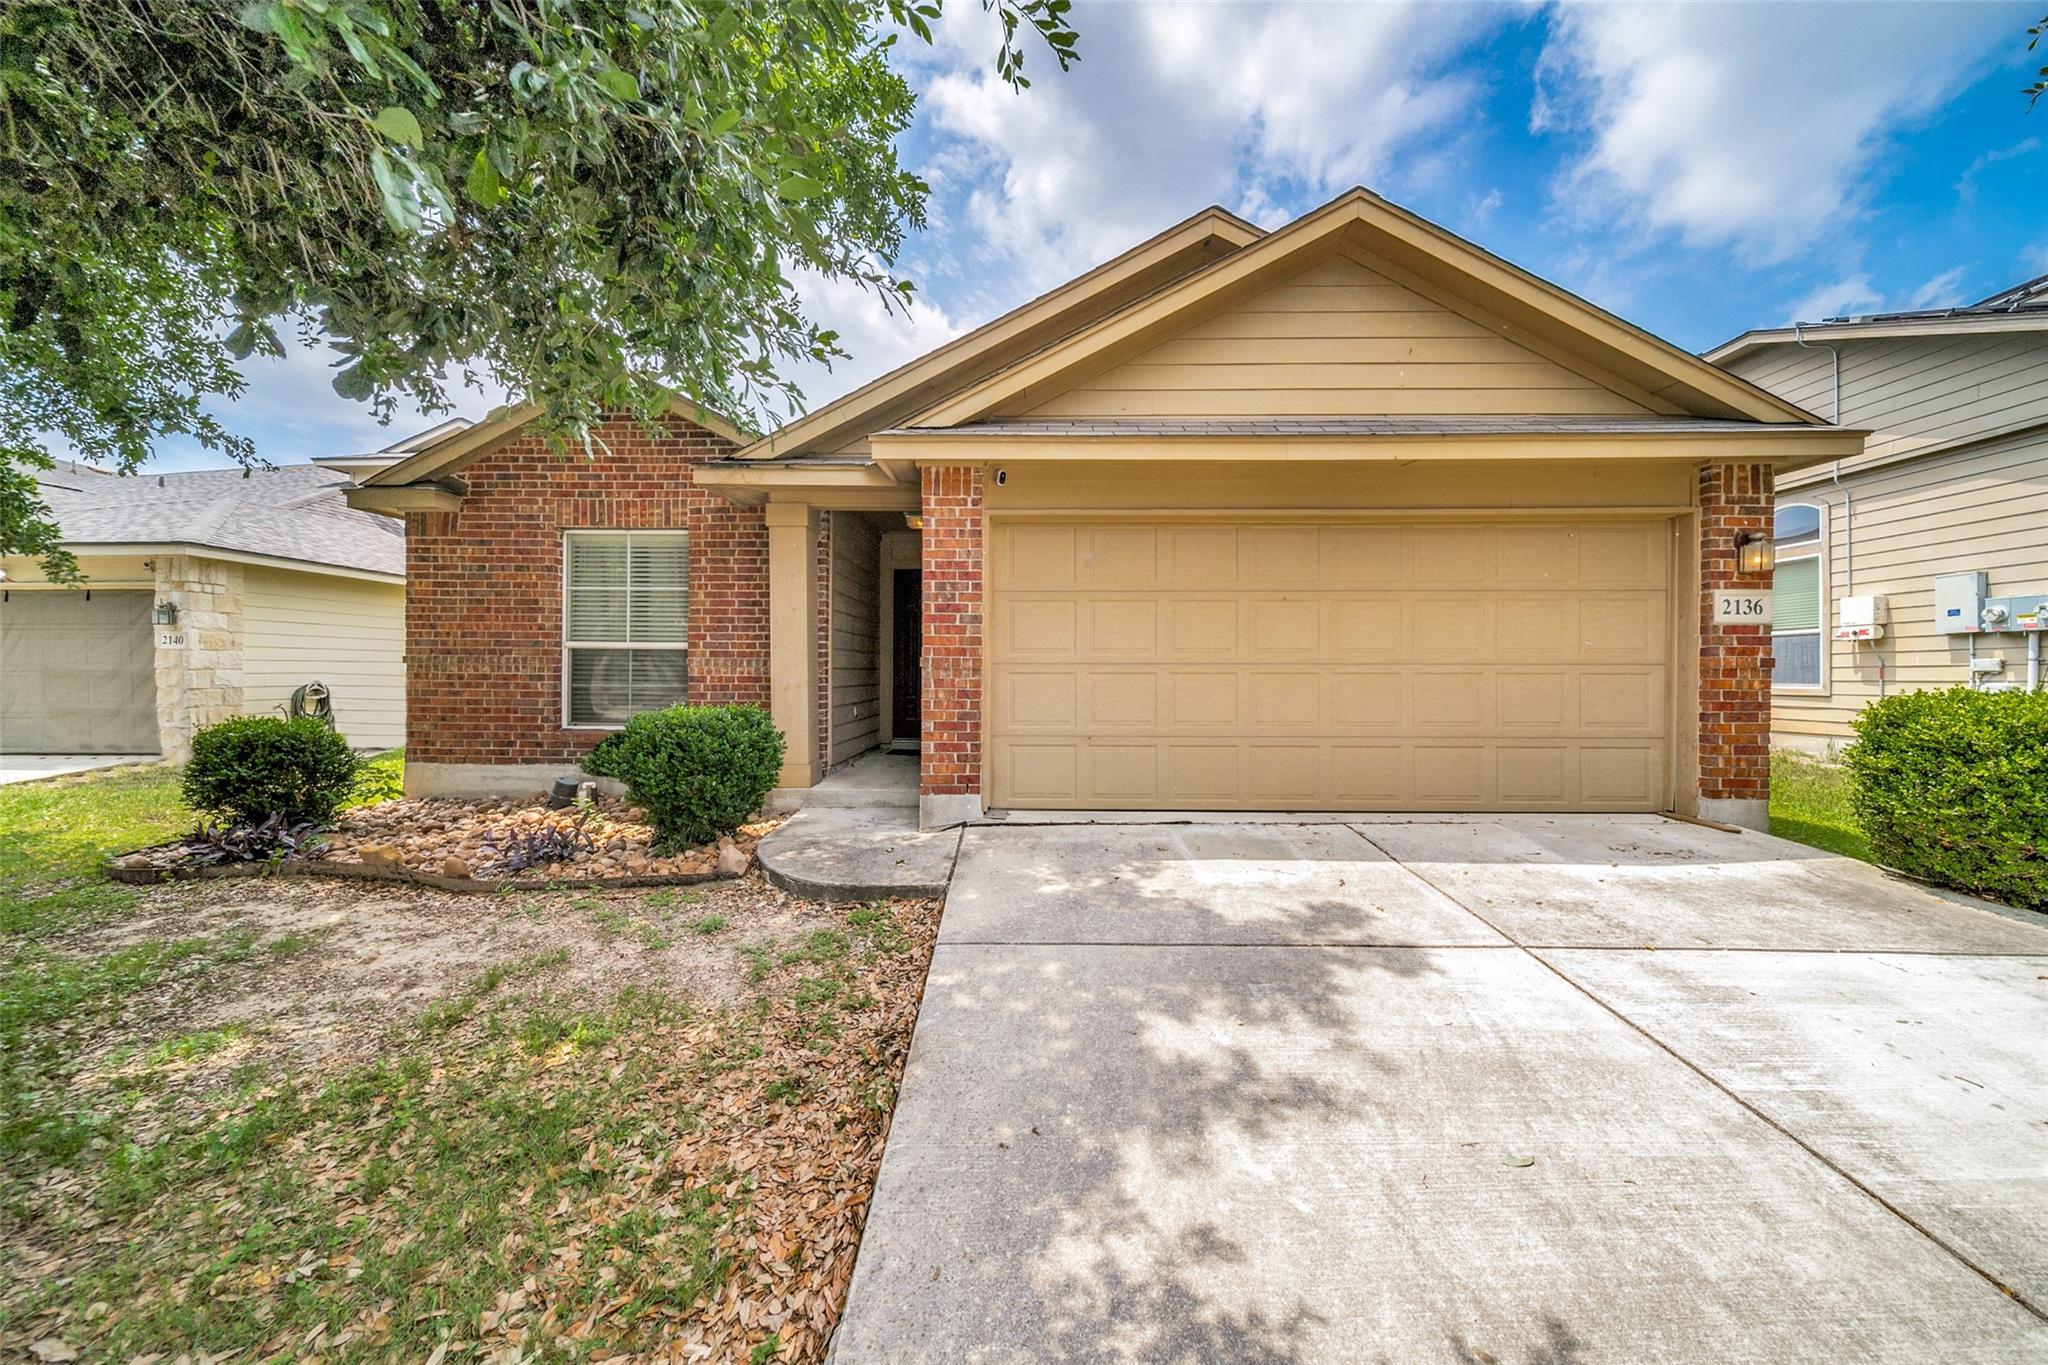 2136 Sinclair, 1371578, New Braunfels, Single Family Residence,  for sale, Fox Realty